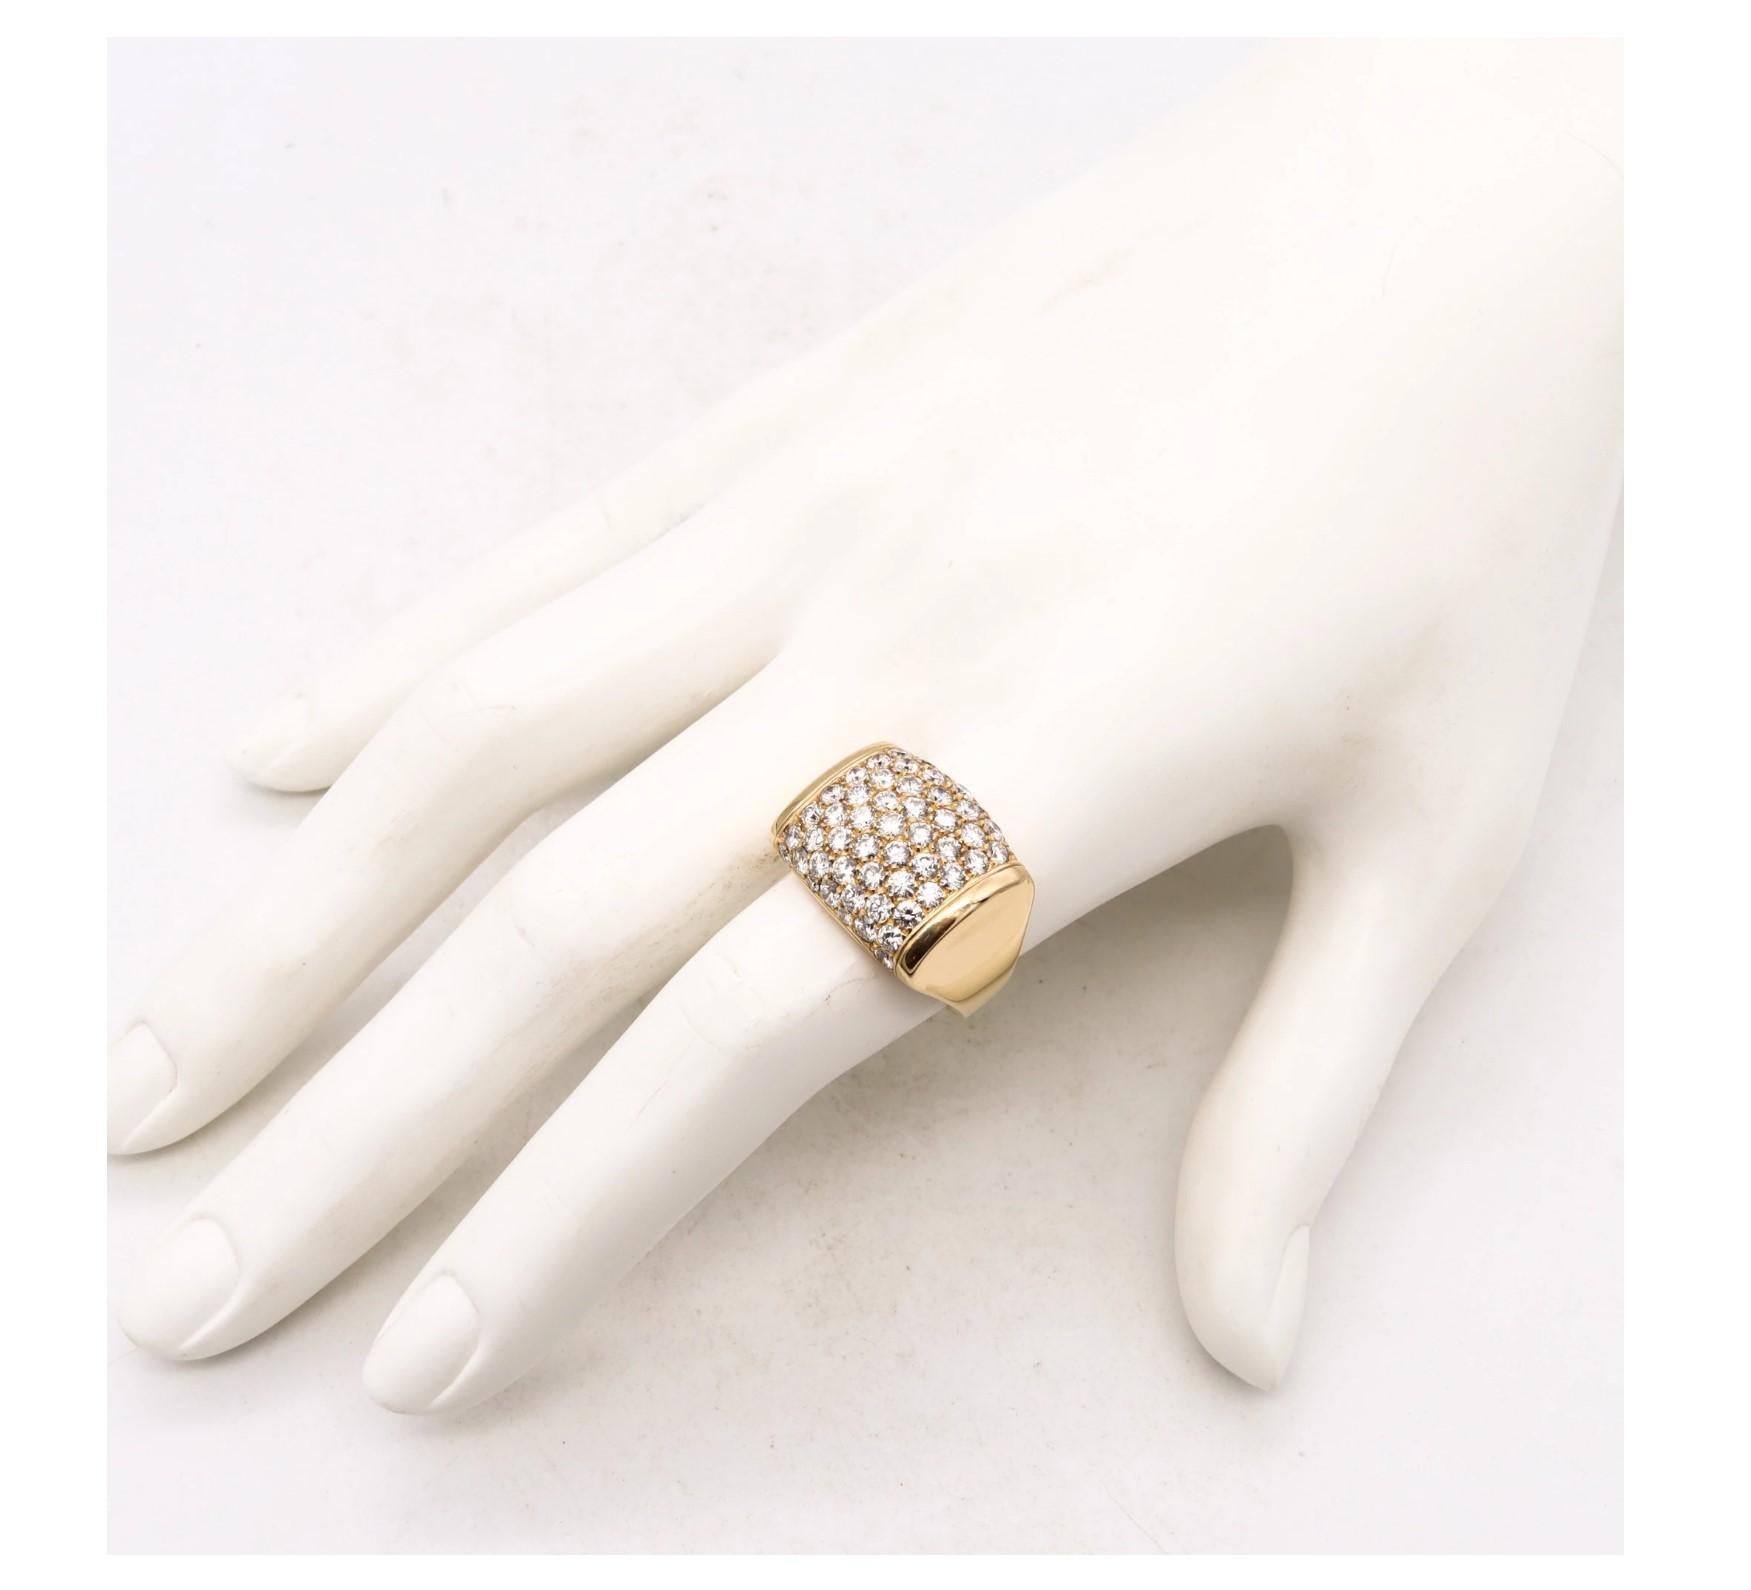 Bvlgari Roma Millenia Cocktail Ring in 18Kt Gold with 3.18 Cts in VS Diamonds For Sale 3